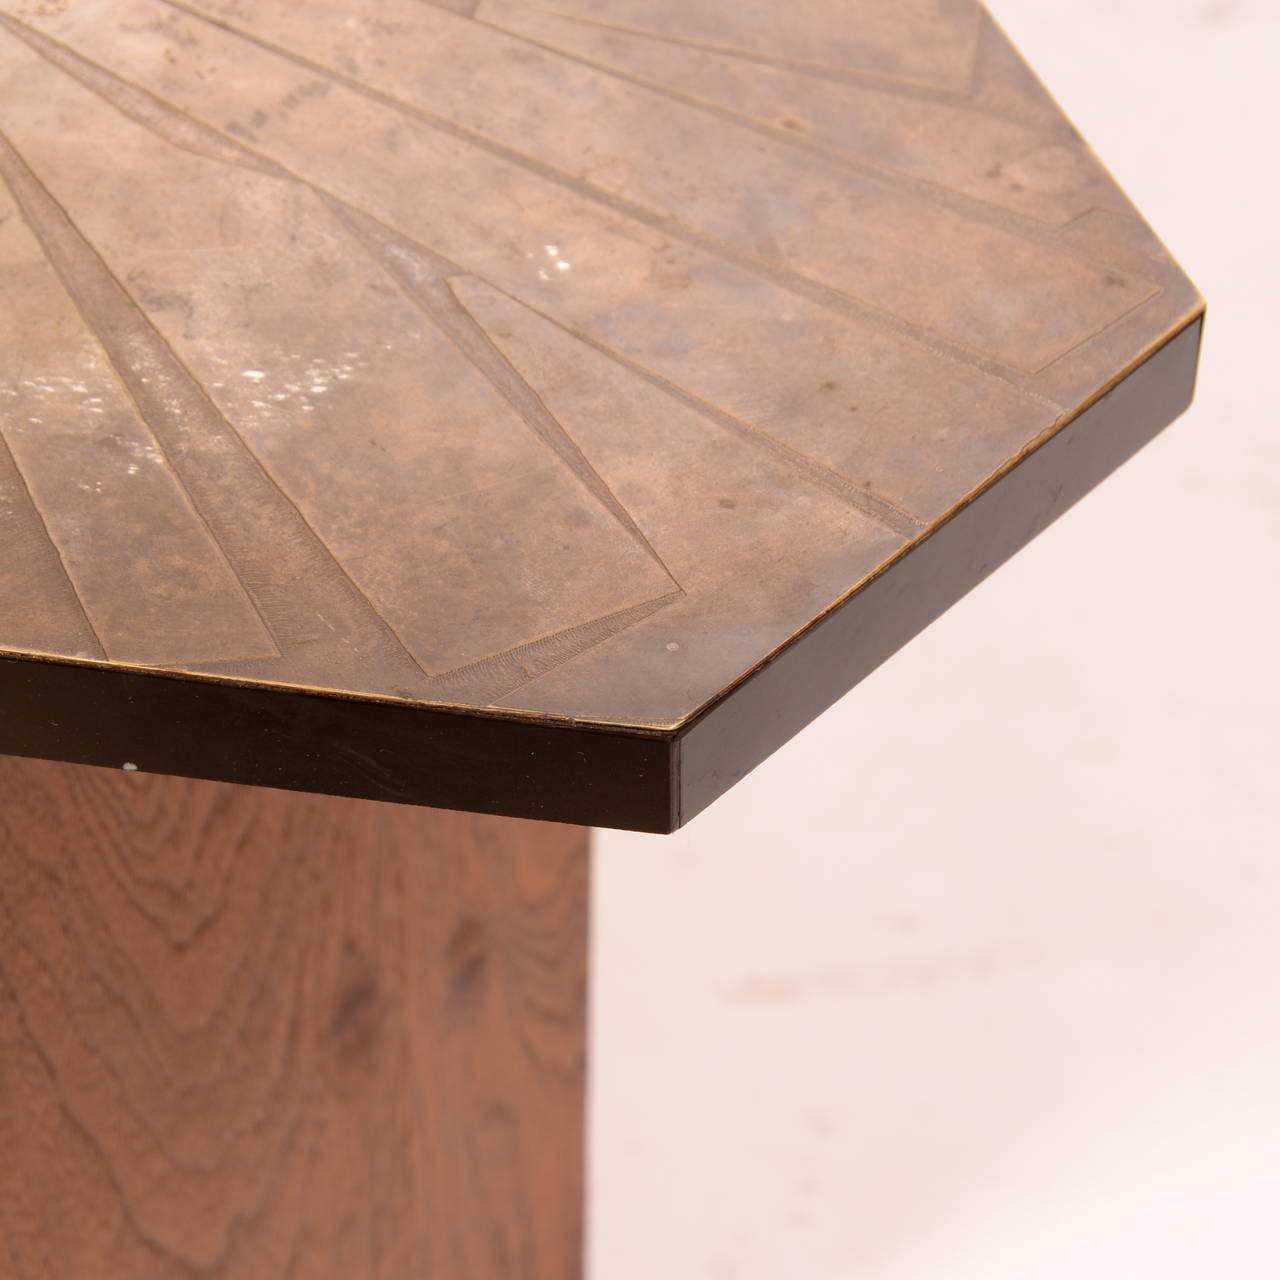 Brutalist Italian Etched Brass Side Table by G. Urso